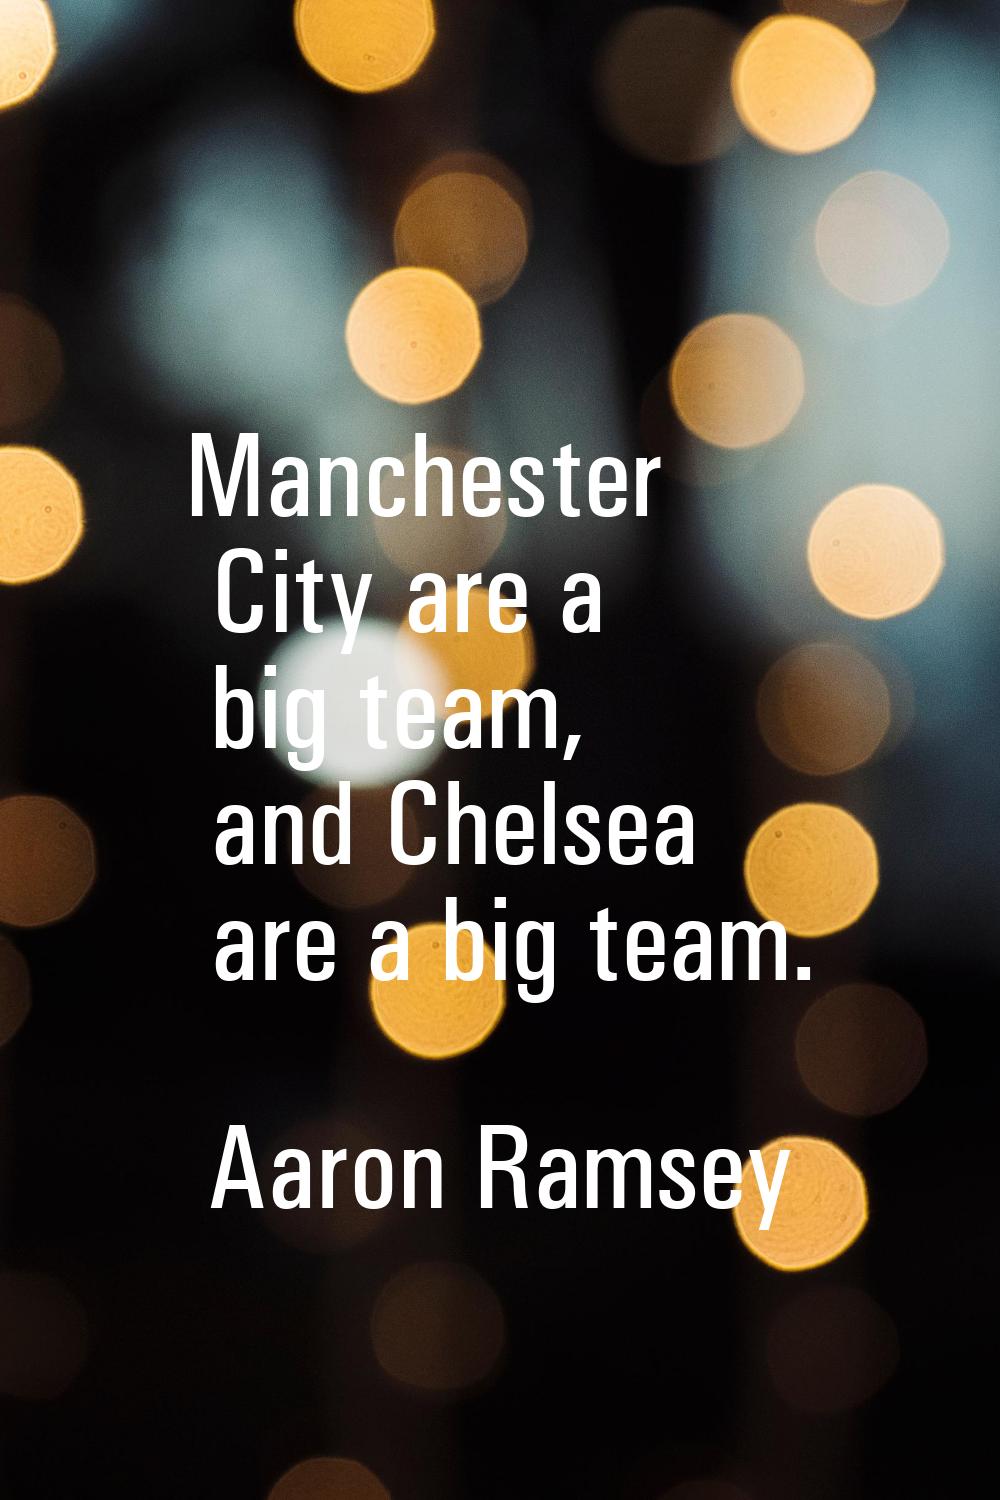 Manchester City are a big team, and Chelsea are a big team.